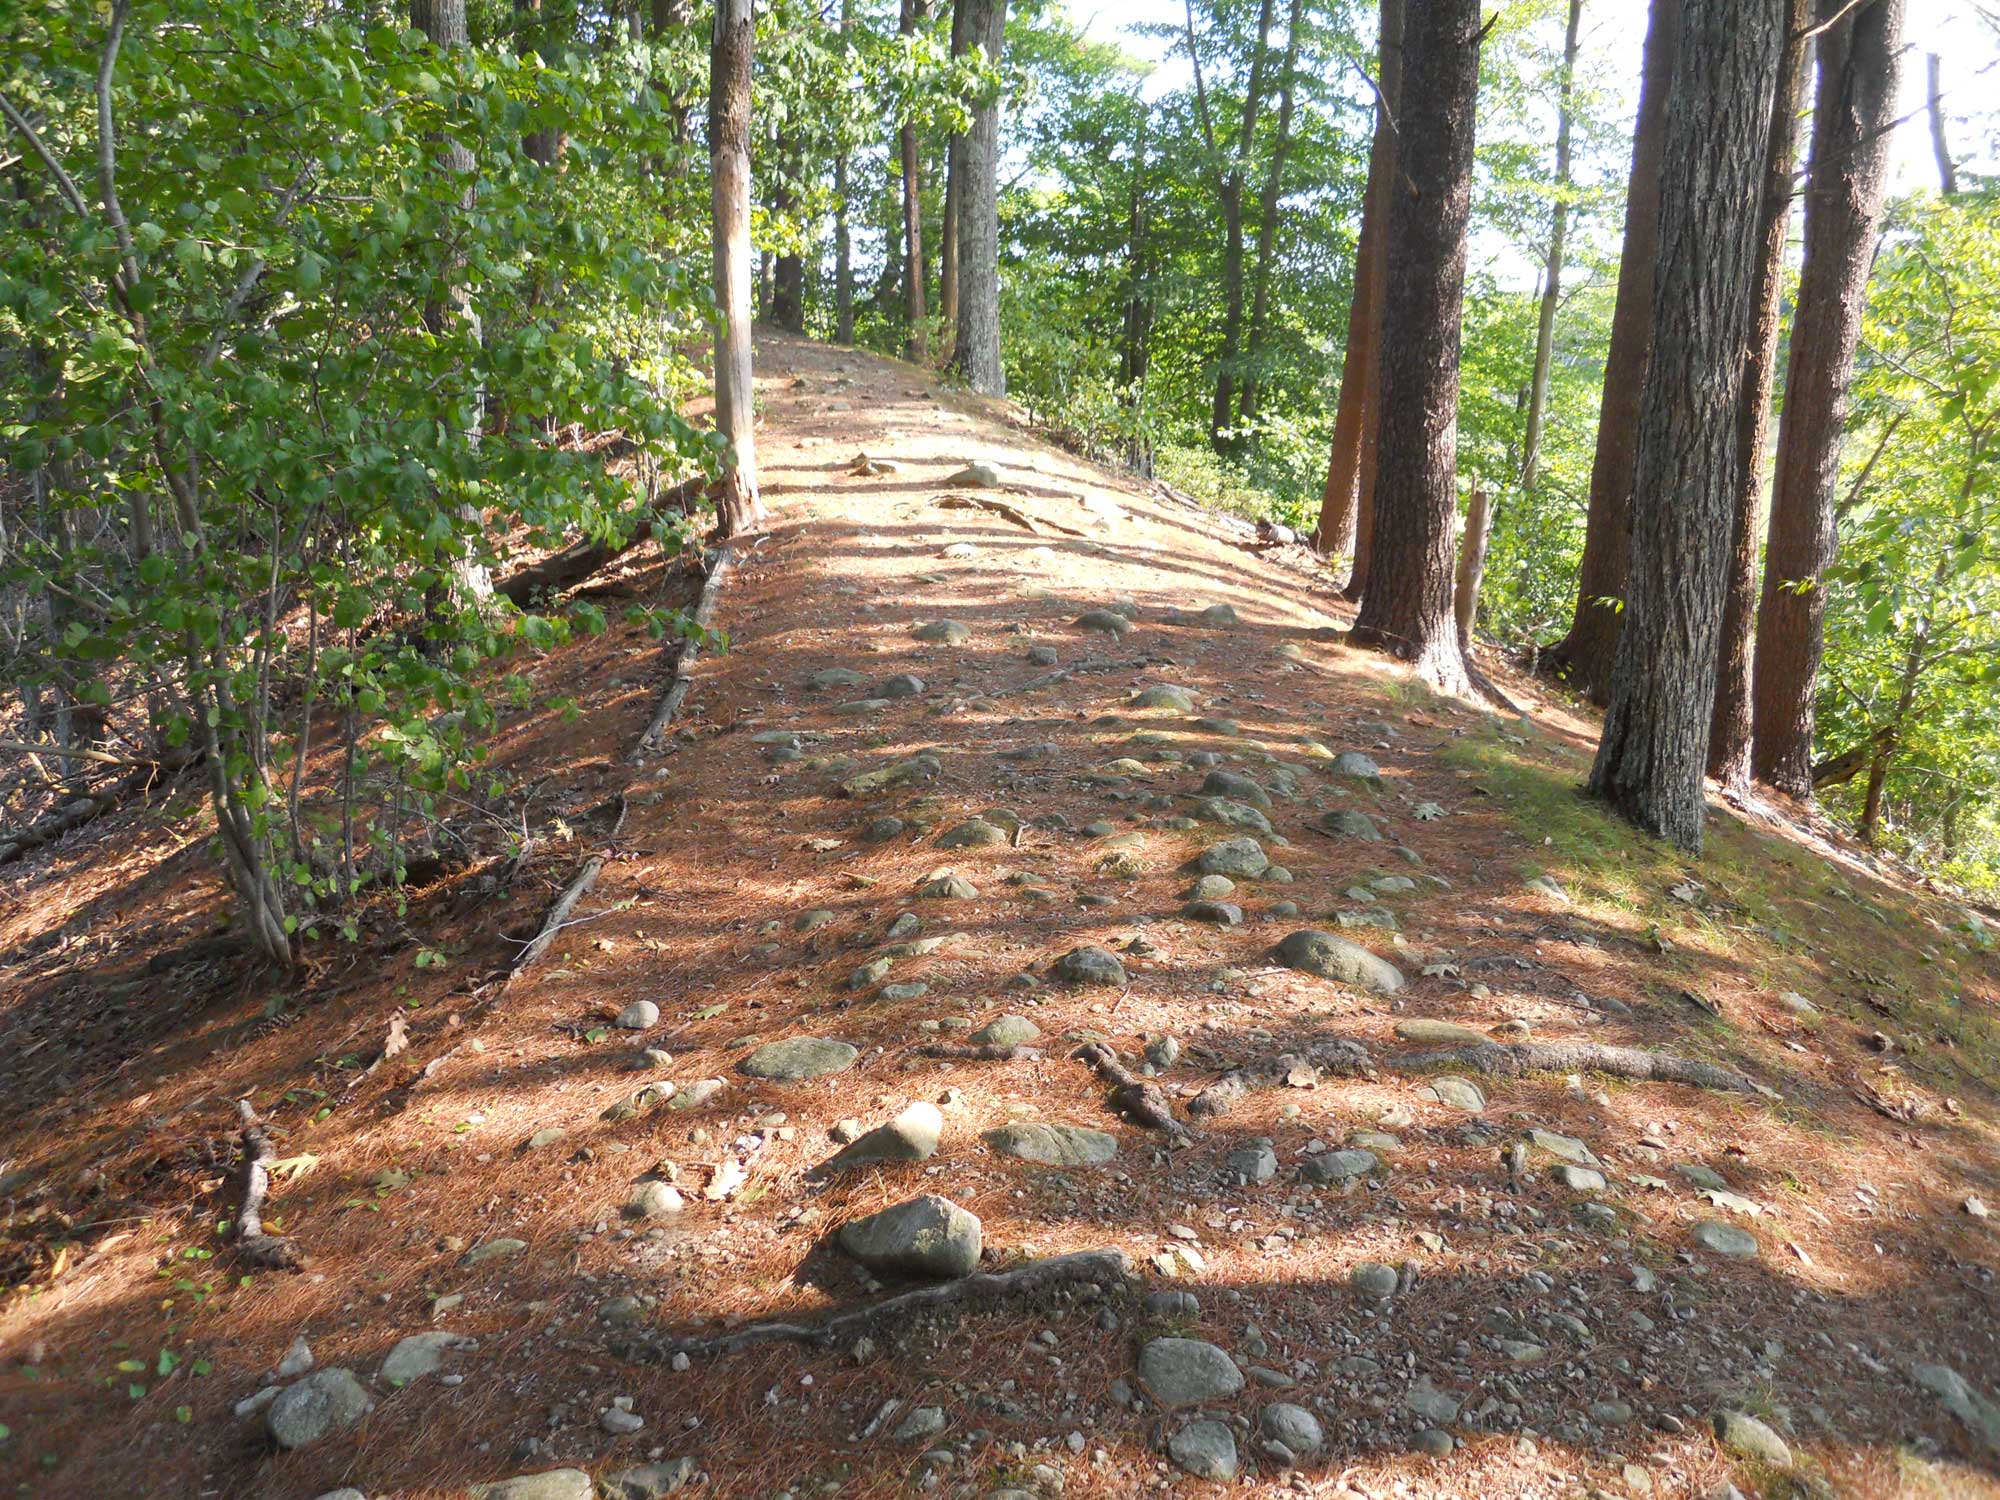 Photograph of a trail on the spine of an esker near Averill's Island, Massachusetts. The photo shows a rocky path extending from the center-front of the image nearly straight back to where it disappears into the trees. The land on either side of the trail slopes downward and has trees growing on it.